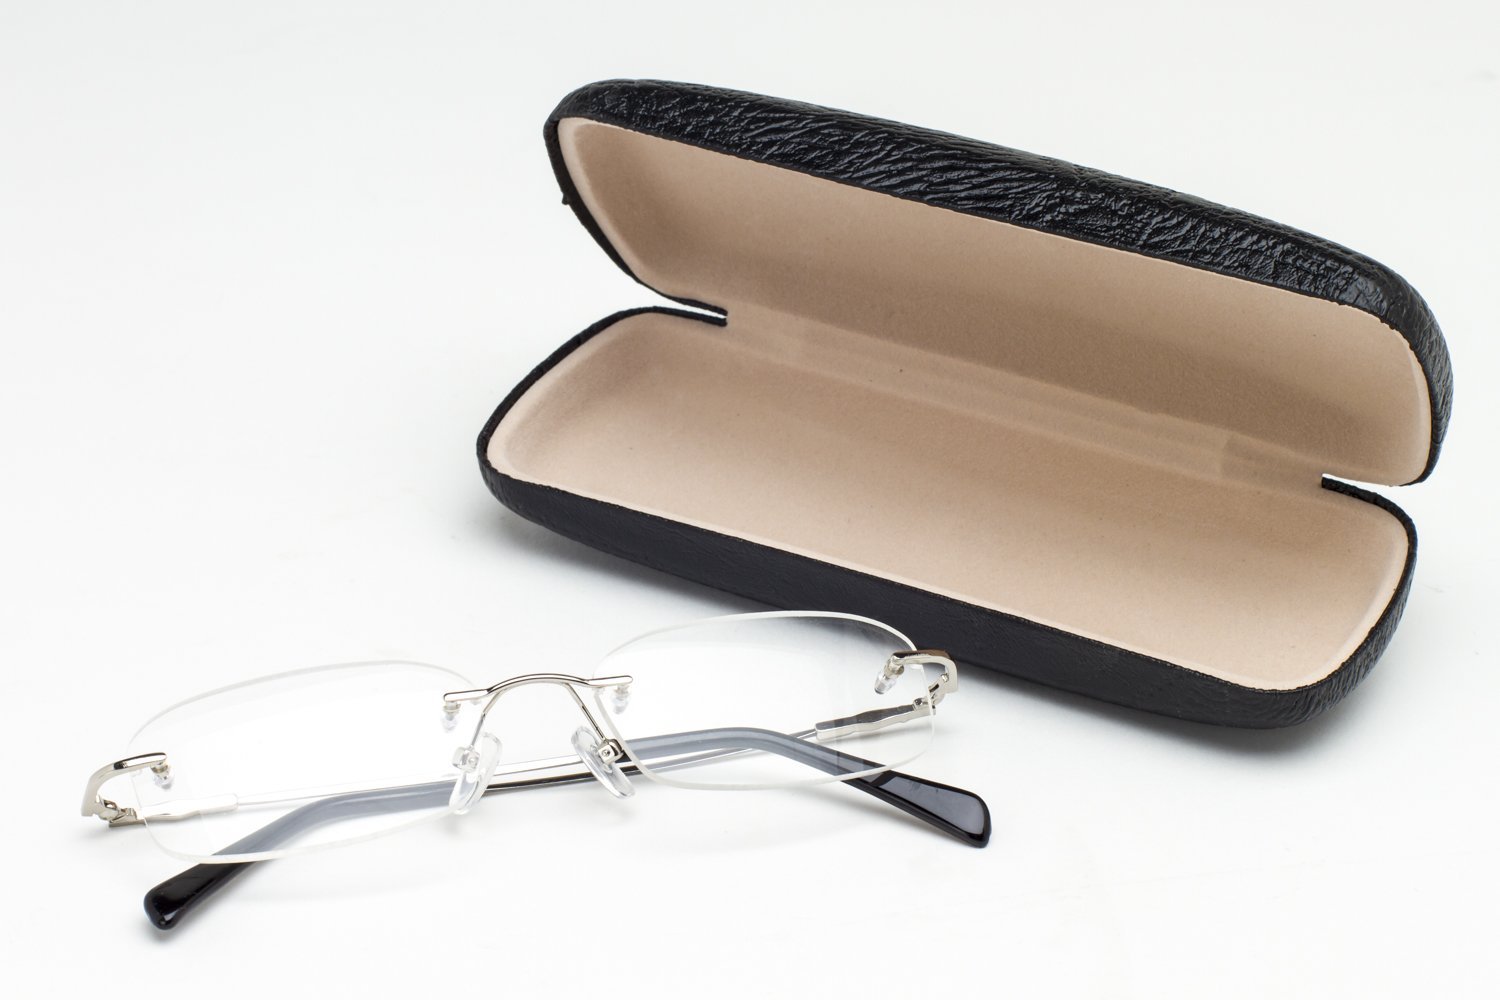 Polycarbonate lenses with Scratch Coating and a hard Black Leather Protective Case